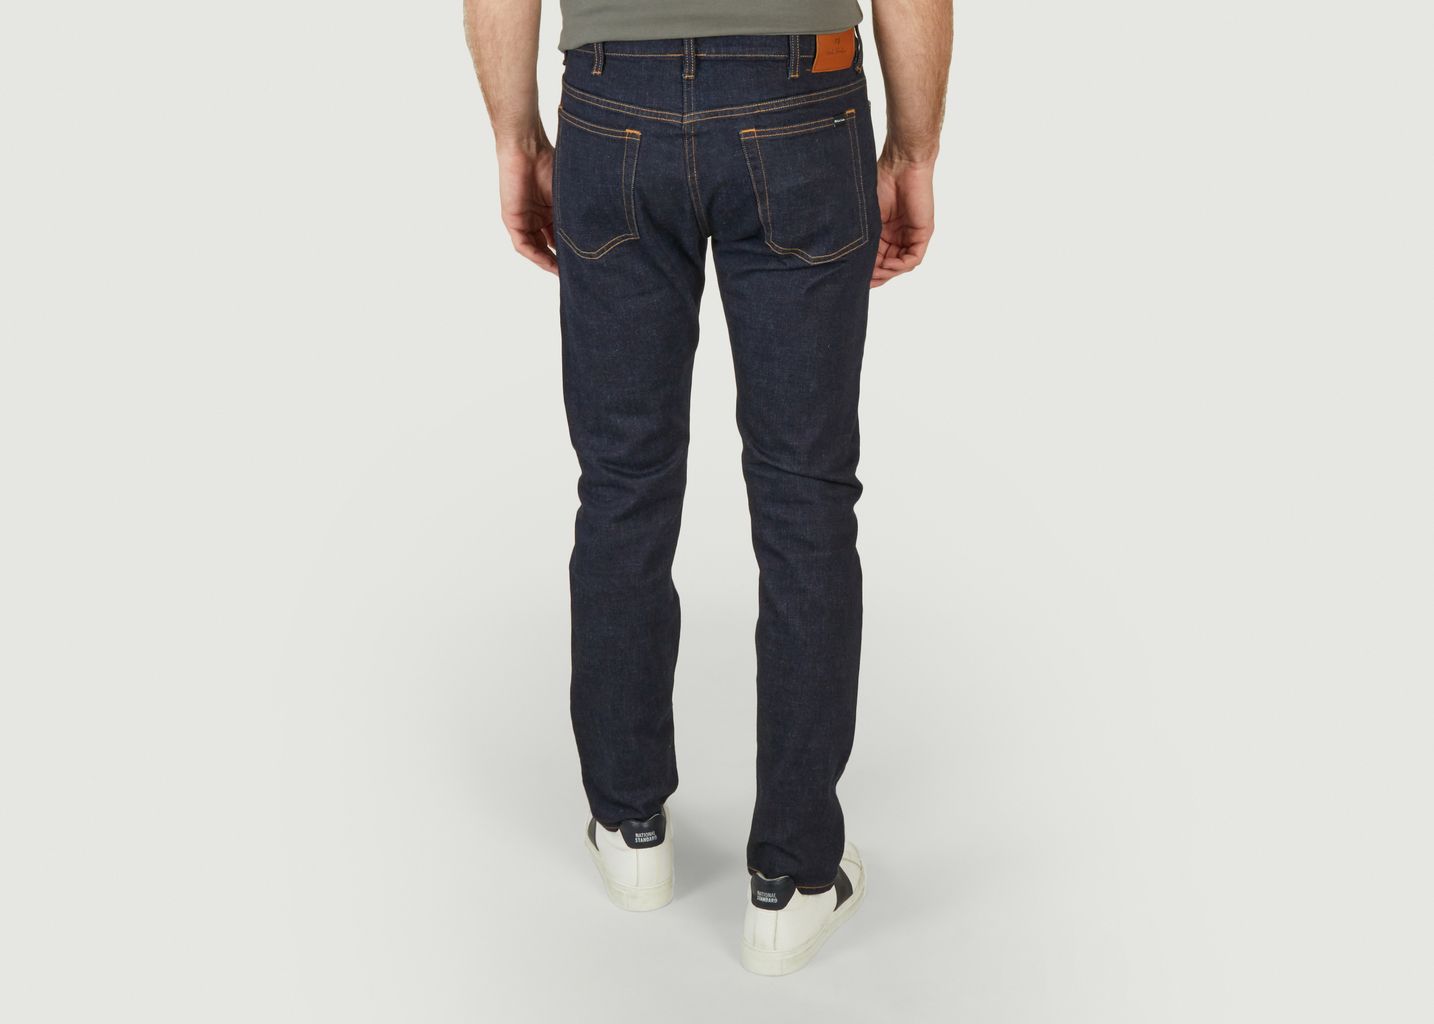 Straight-cut jeans - PS by PAUL SMITH